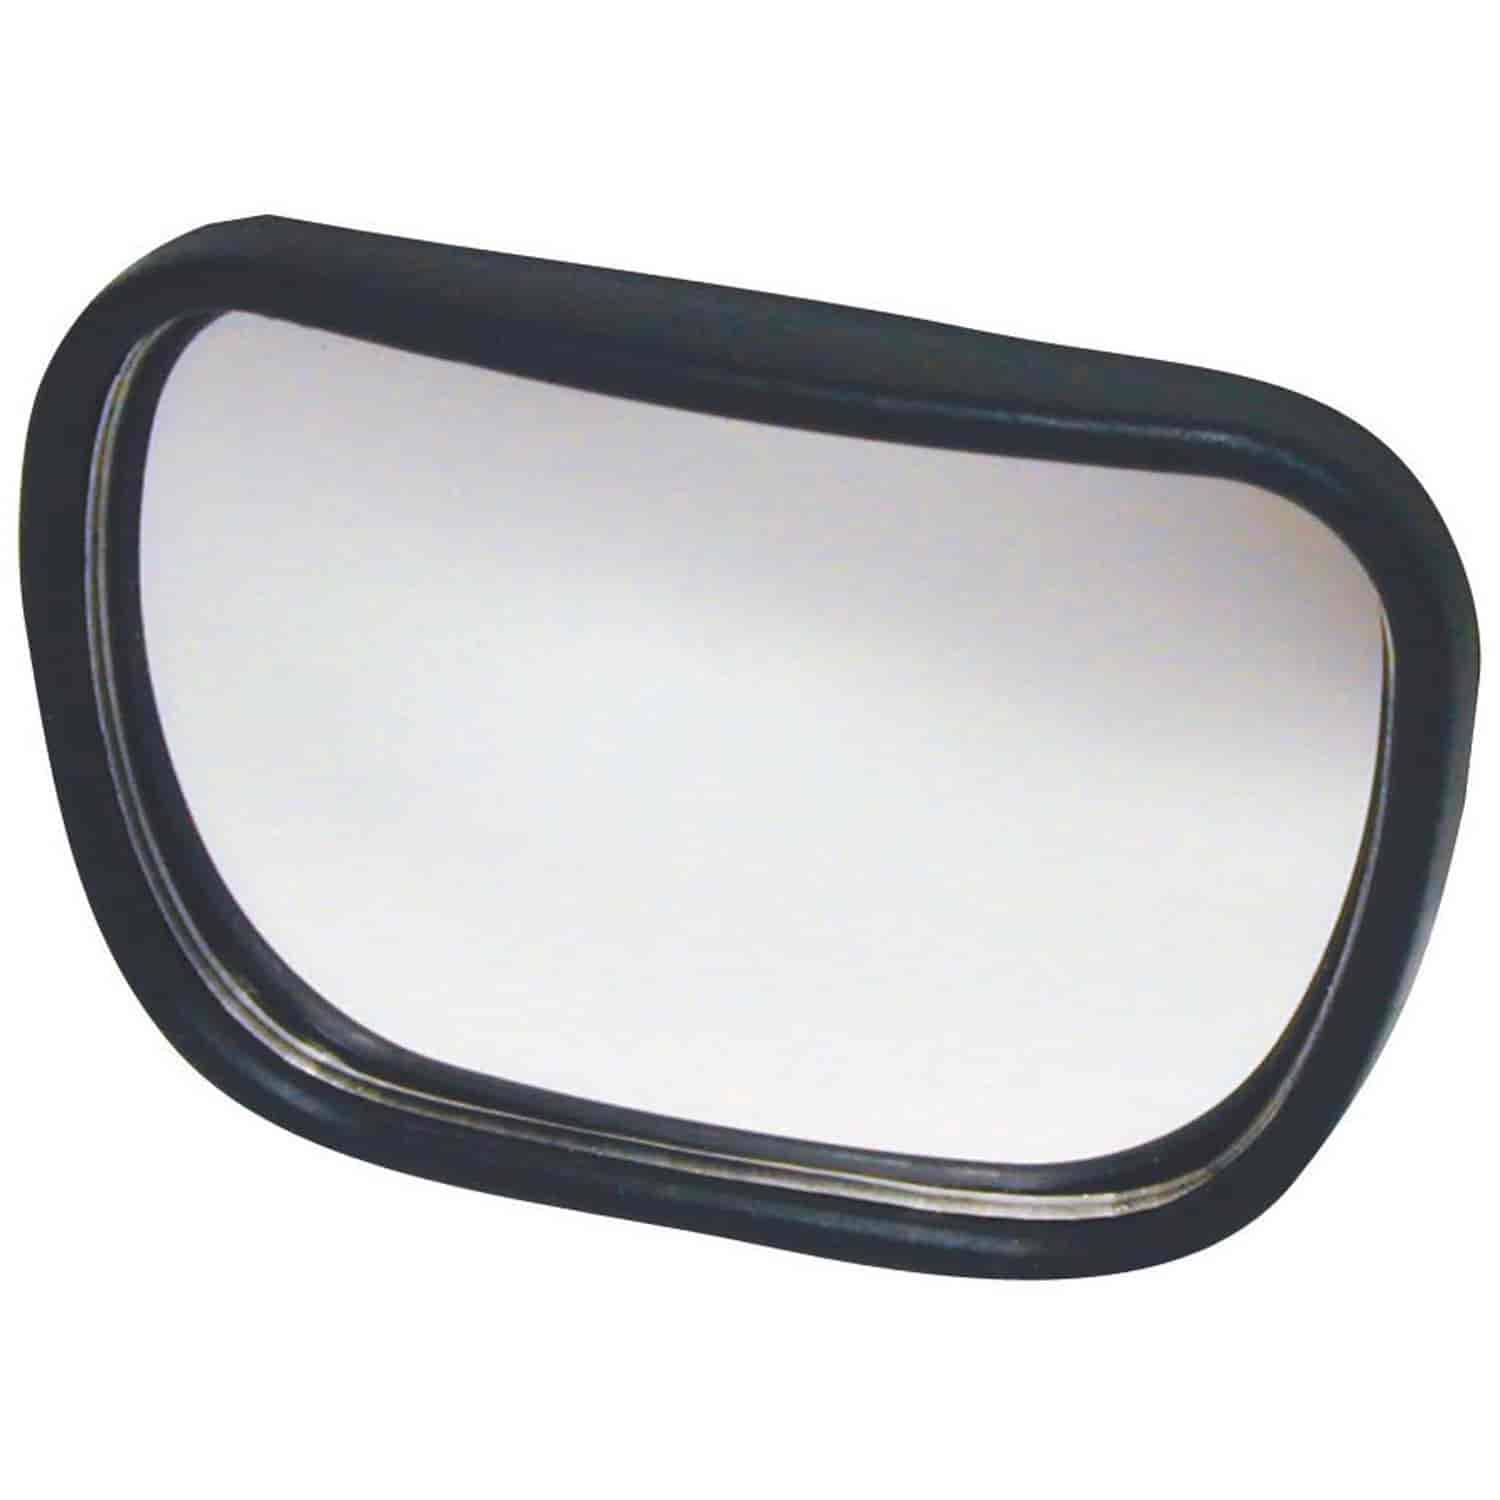 Spot Mirror 3 1/4 x 2 Wedge Easy Stick-on Installation Convex Lens increases visibility Includes adhesive tape for easy install.